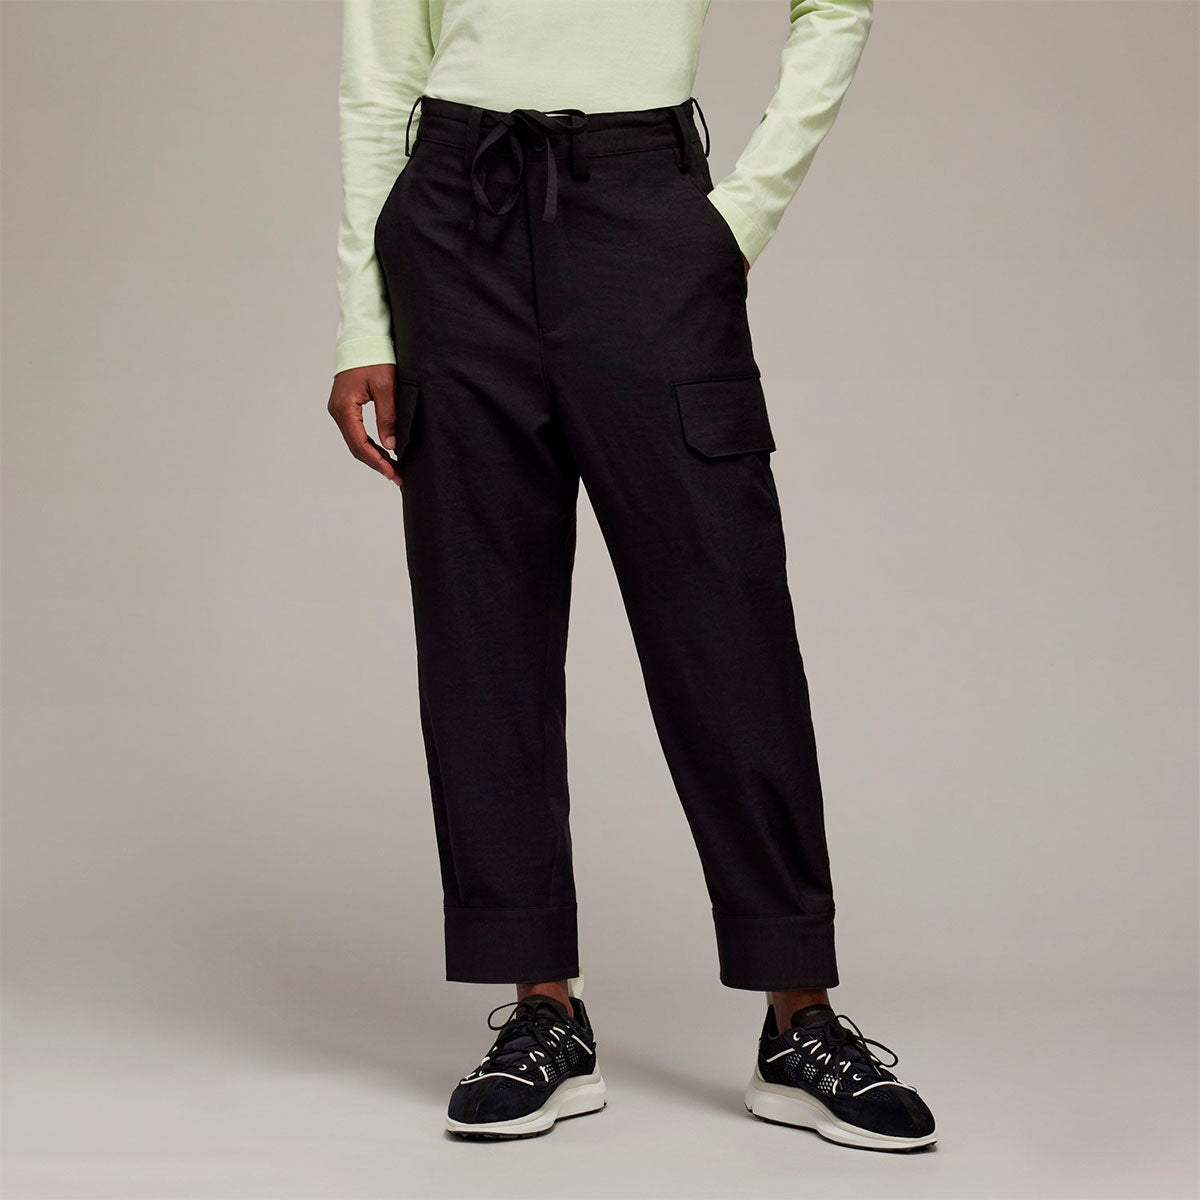 W CLASSIC SPORT UNIFORM CARGO PANTS - Why are you here?